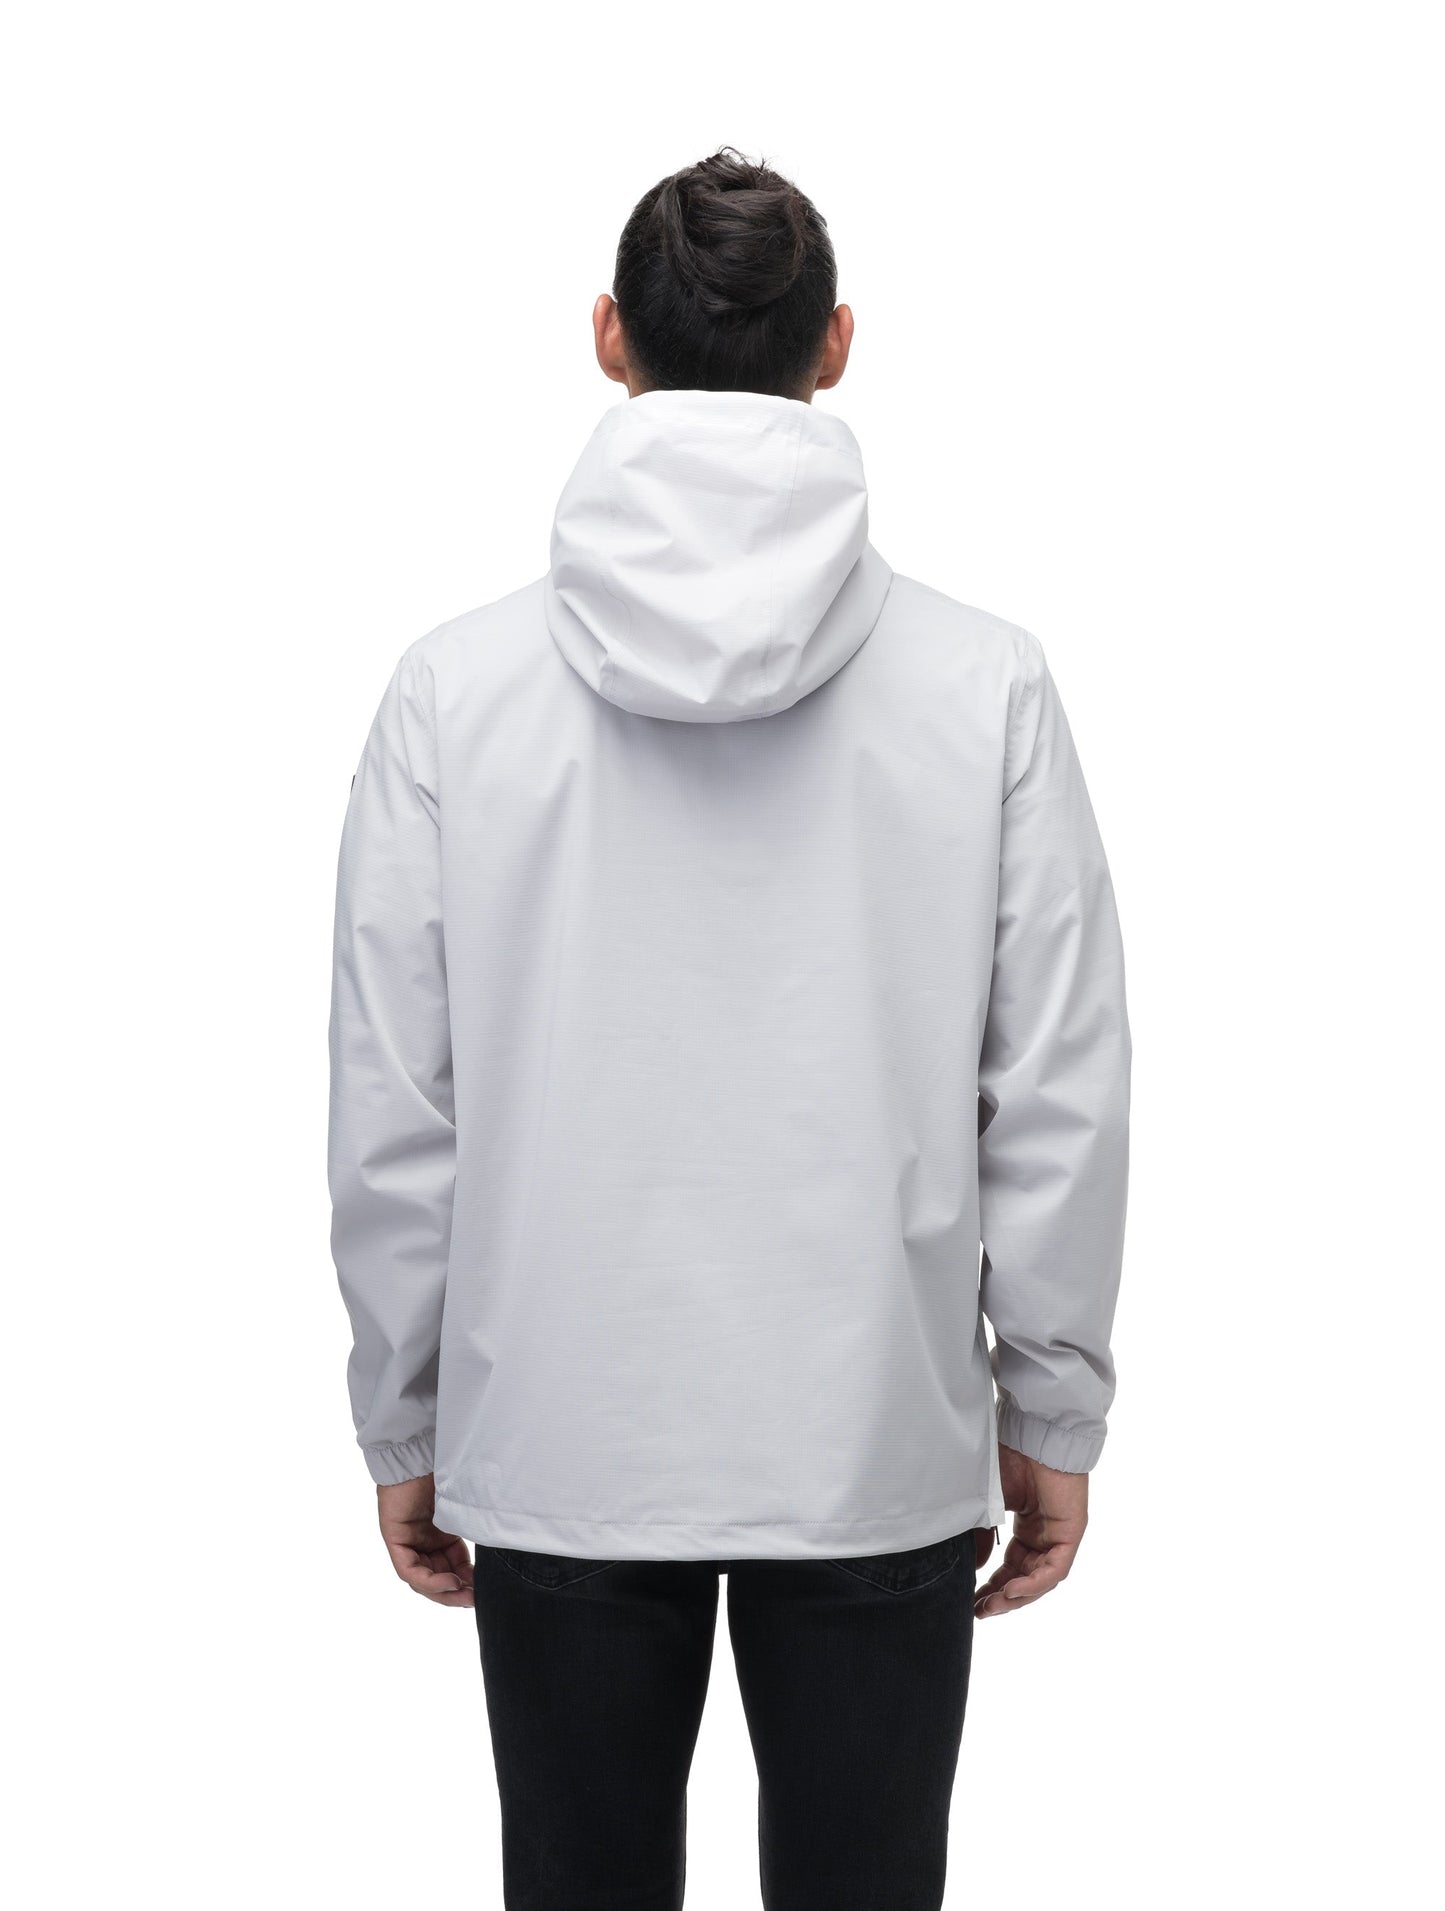 Men's hip length hooded pullover anorak with zipper at collar in Light Grey/Chalk